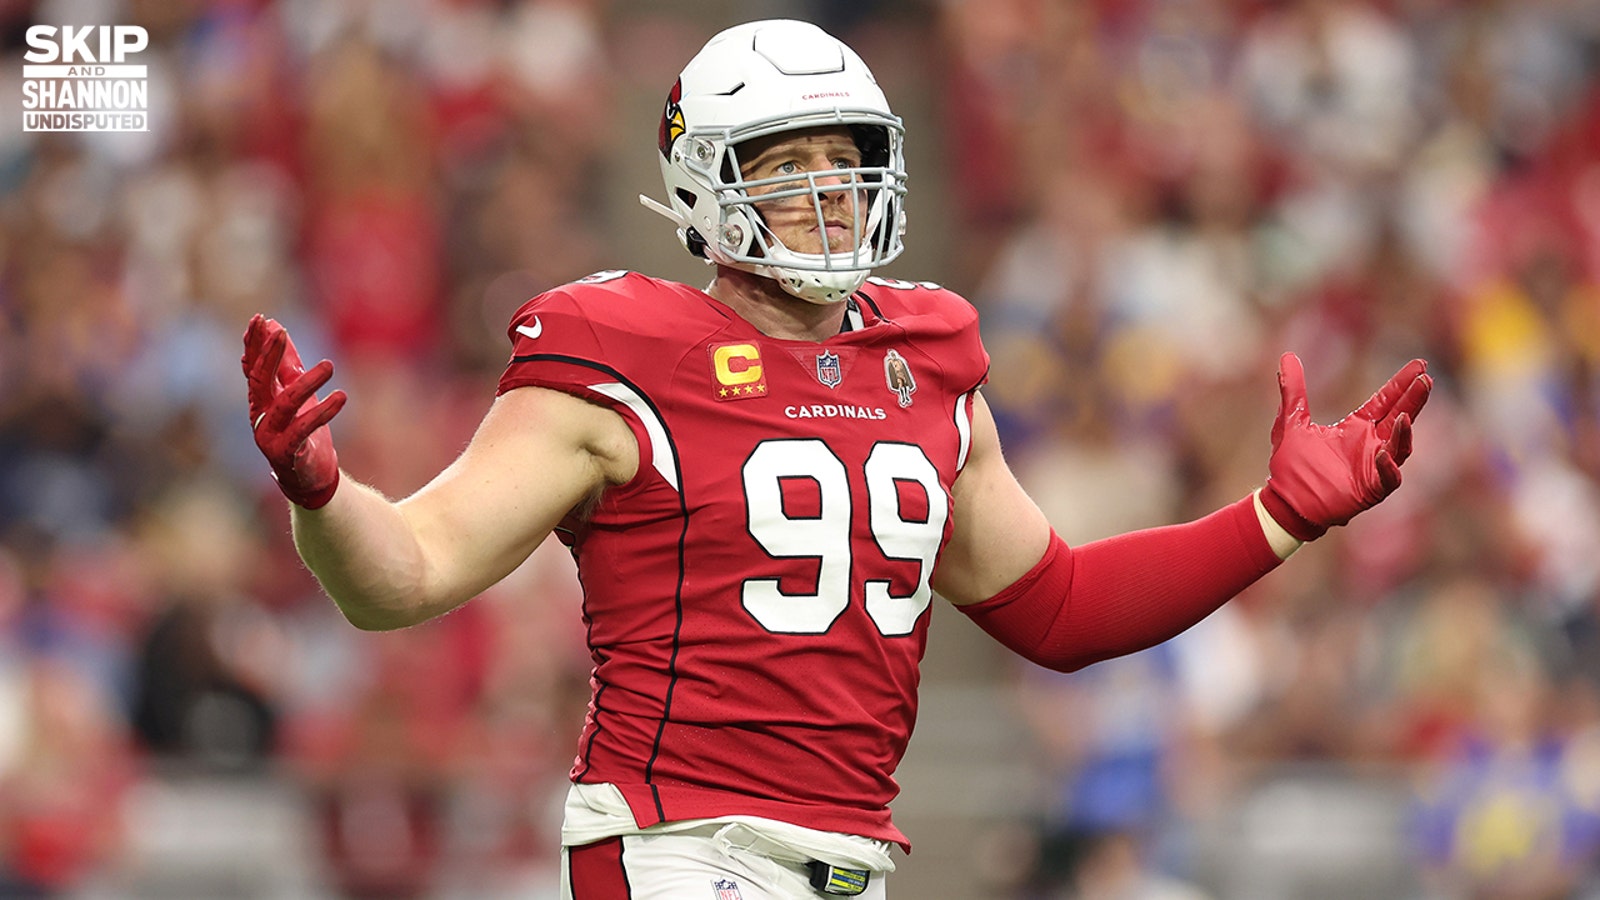 J.J. Watt announces he plans to retire at the end of this NFL season